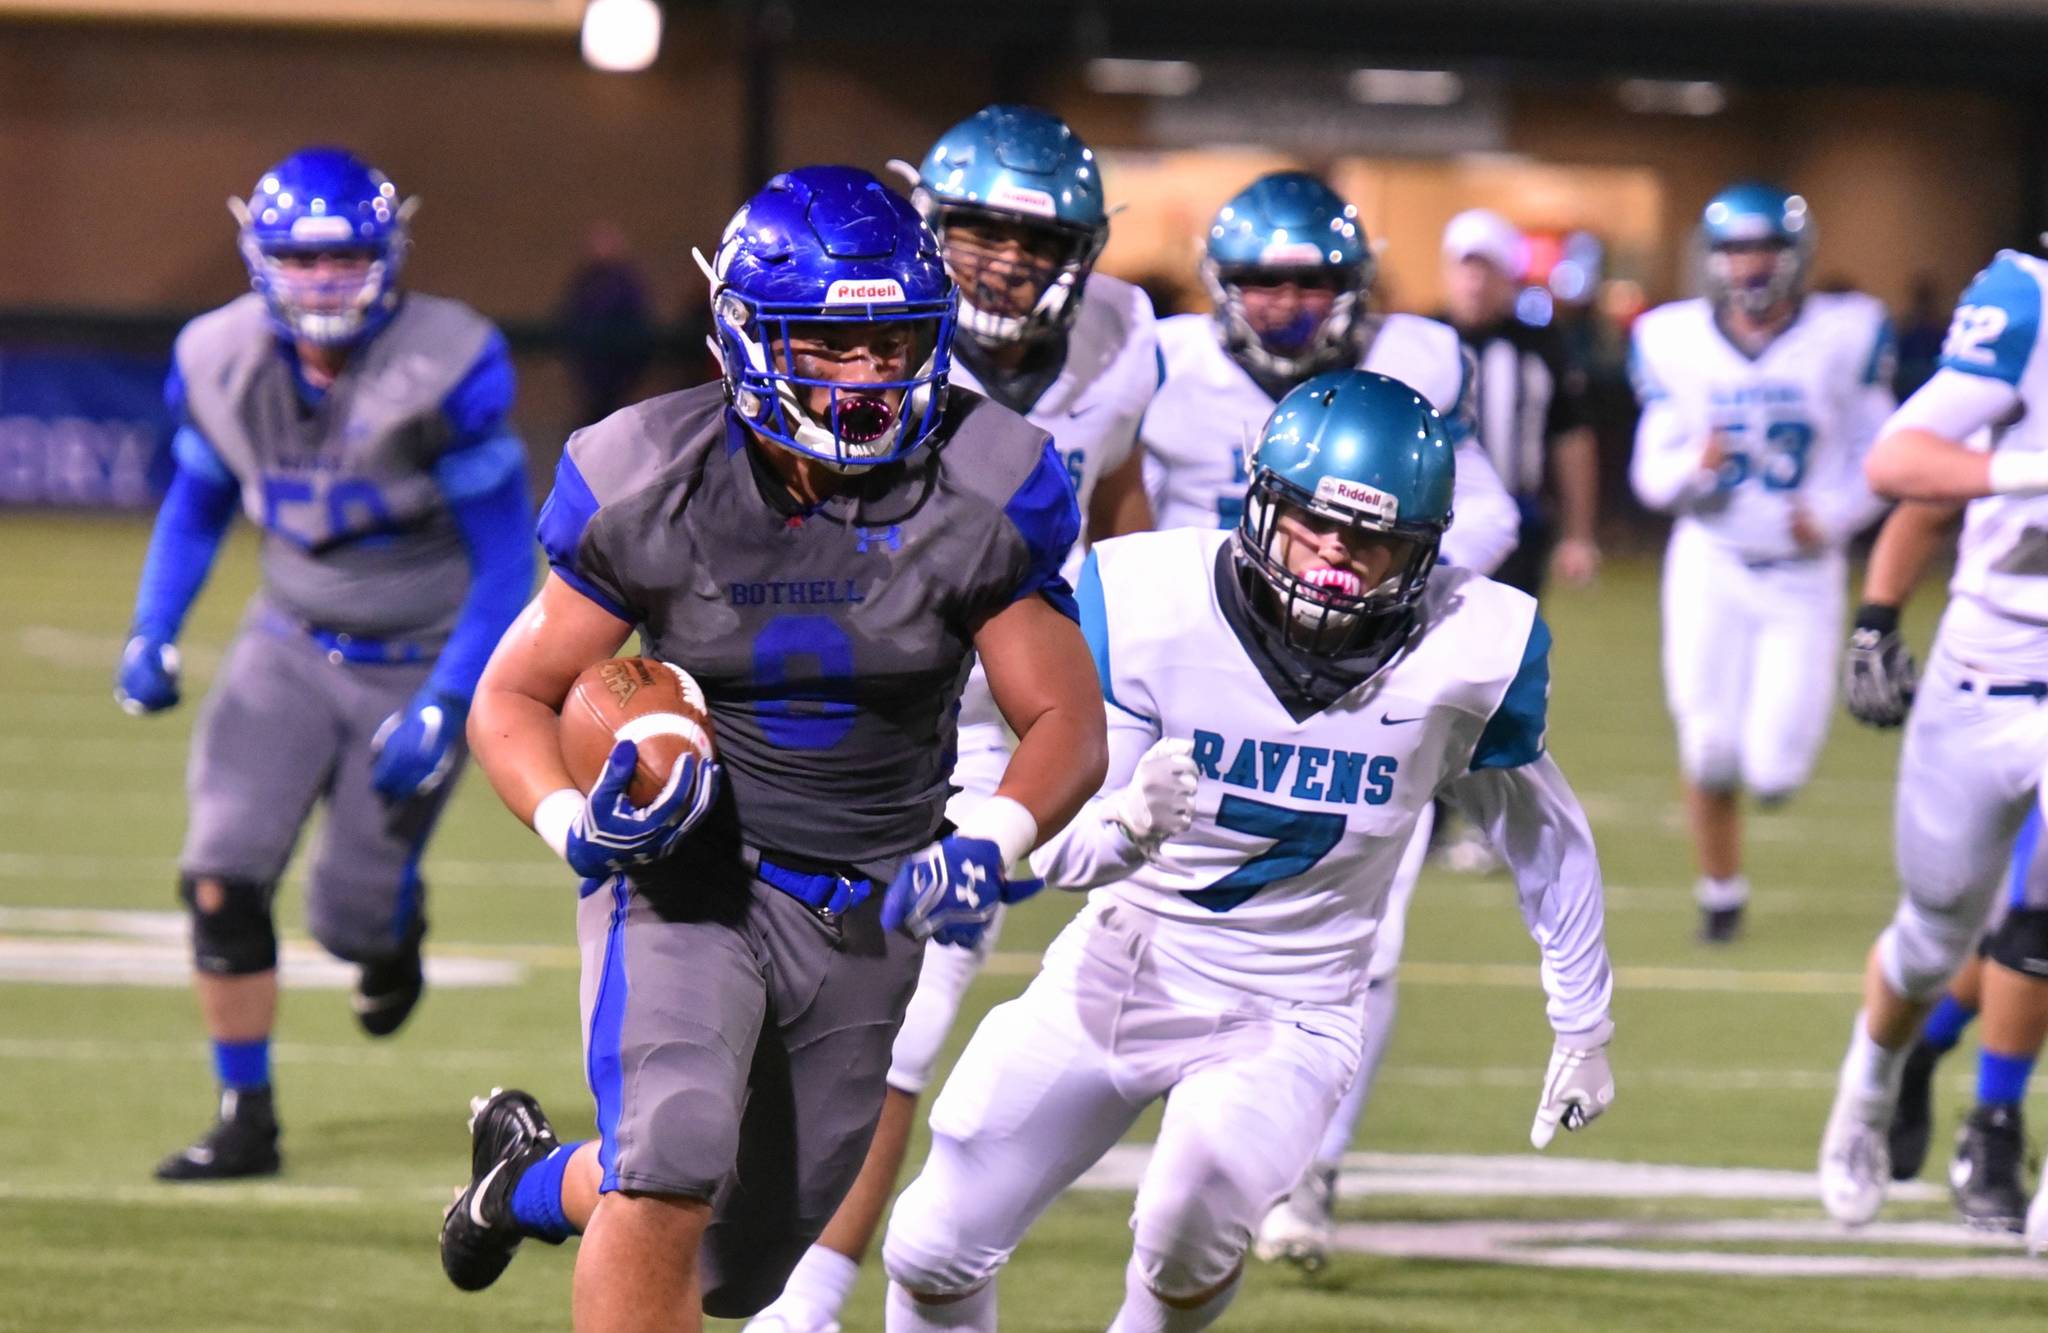 Bothell blasts into state playoffs